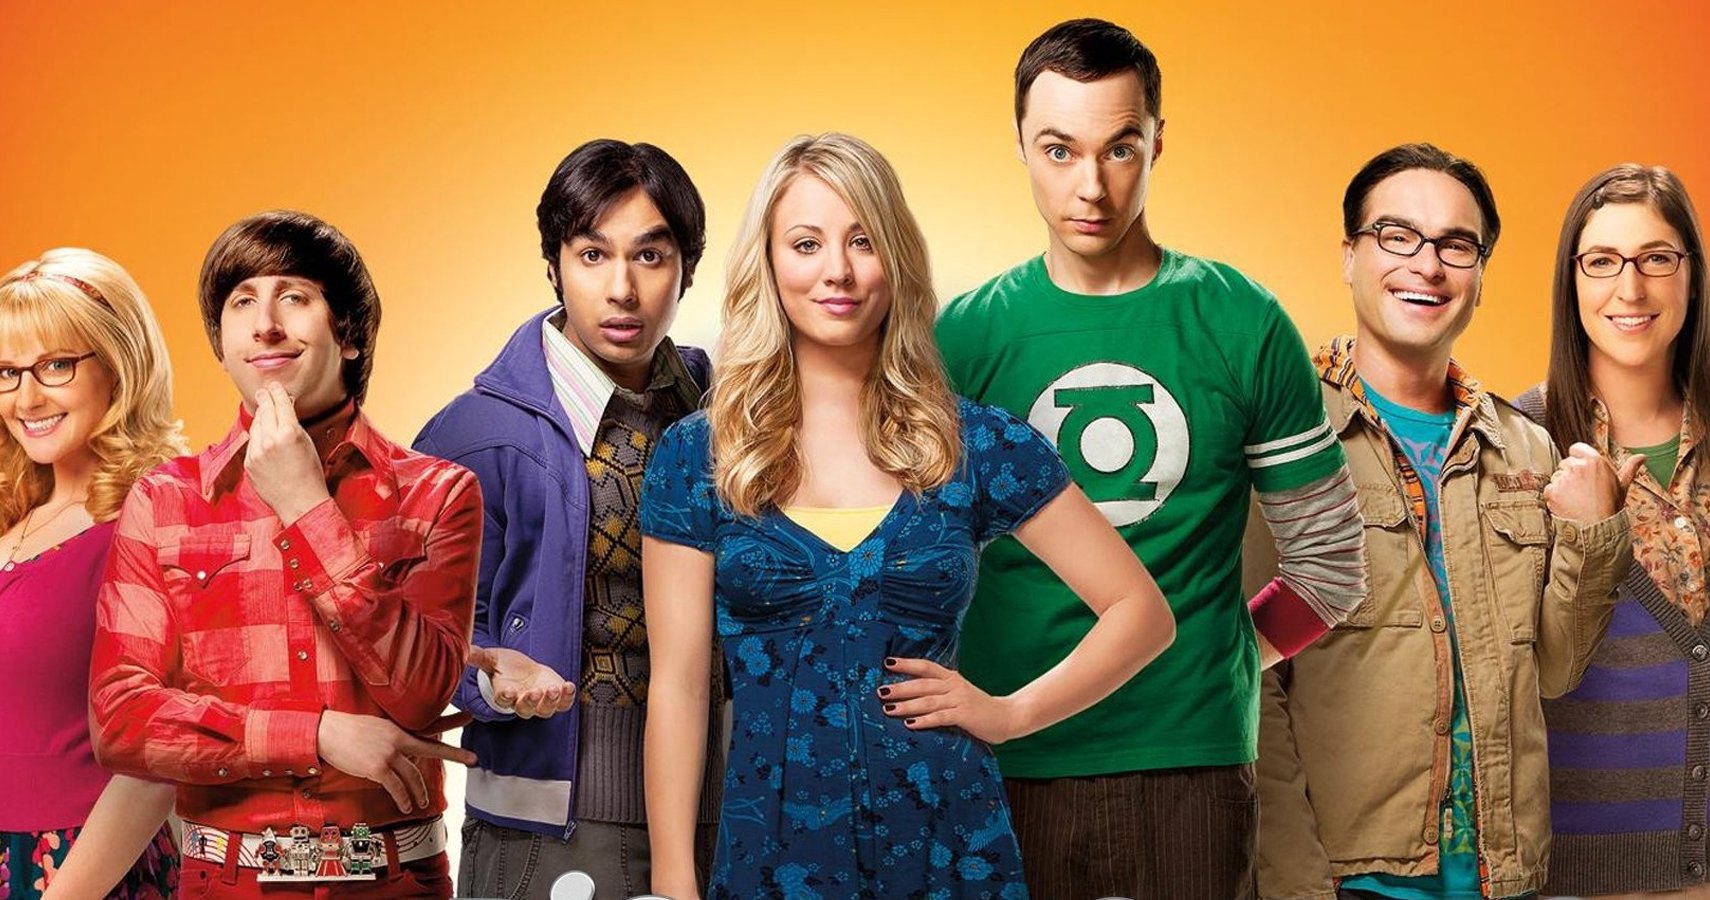 Big-Bang-Theory-Every-Main-Character-Ranked-By-Funniness-featured-image.jpg